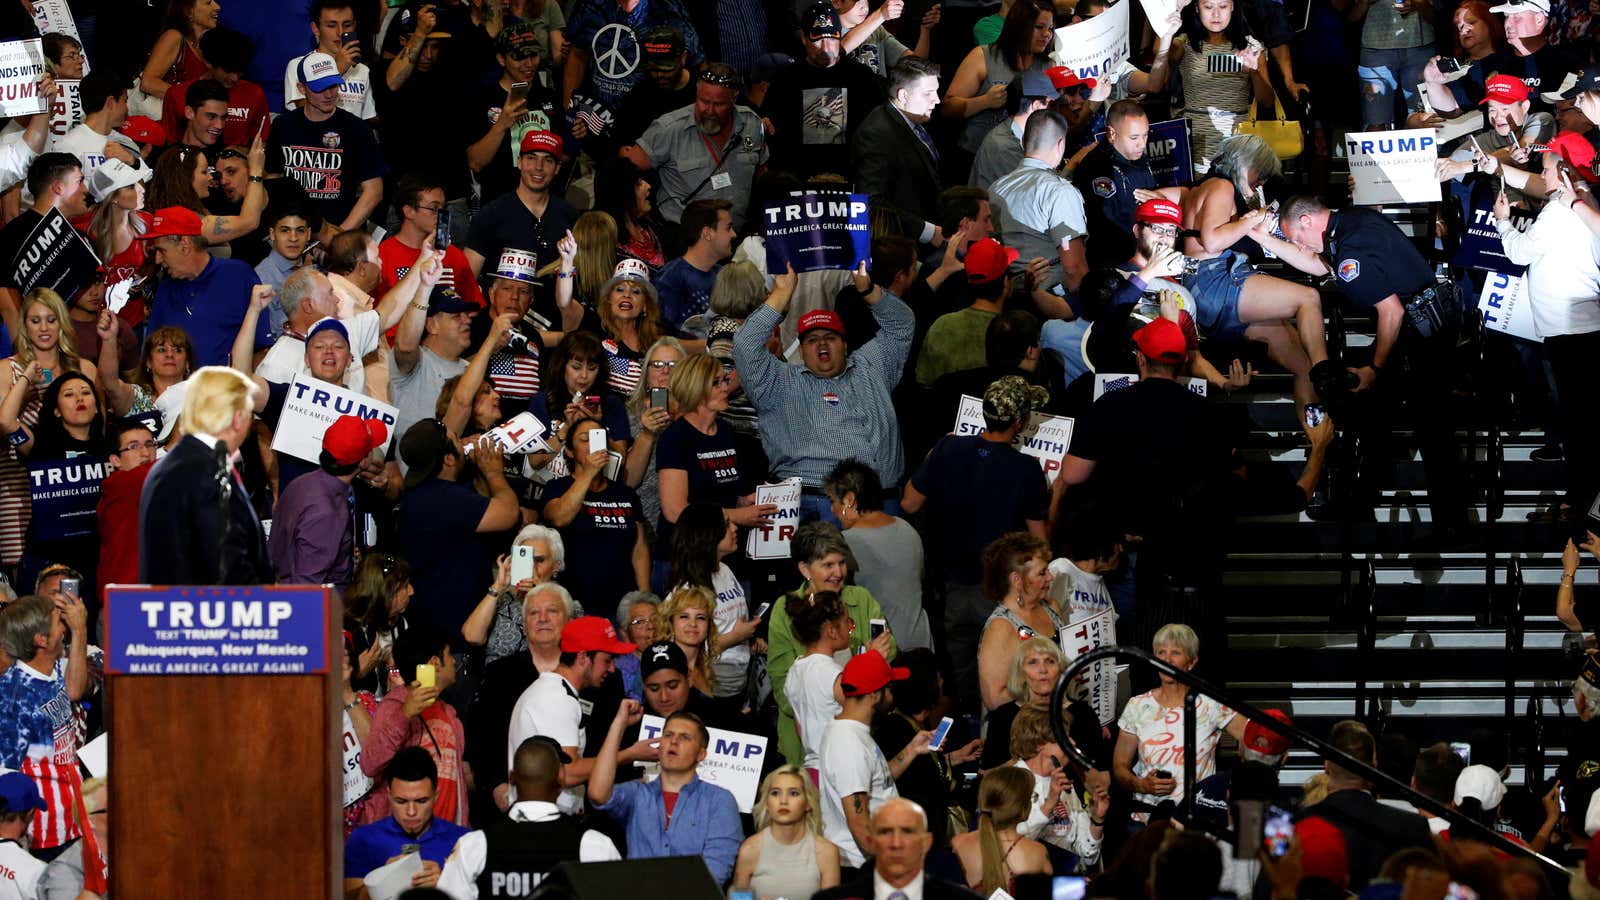 An election rally for Donald Trump in late 2020.